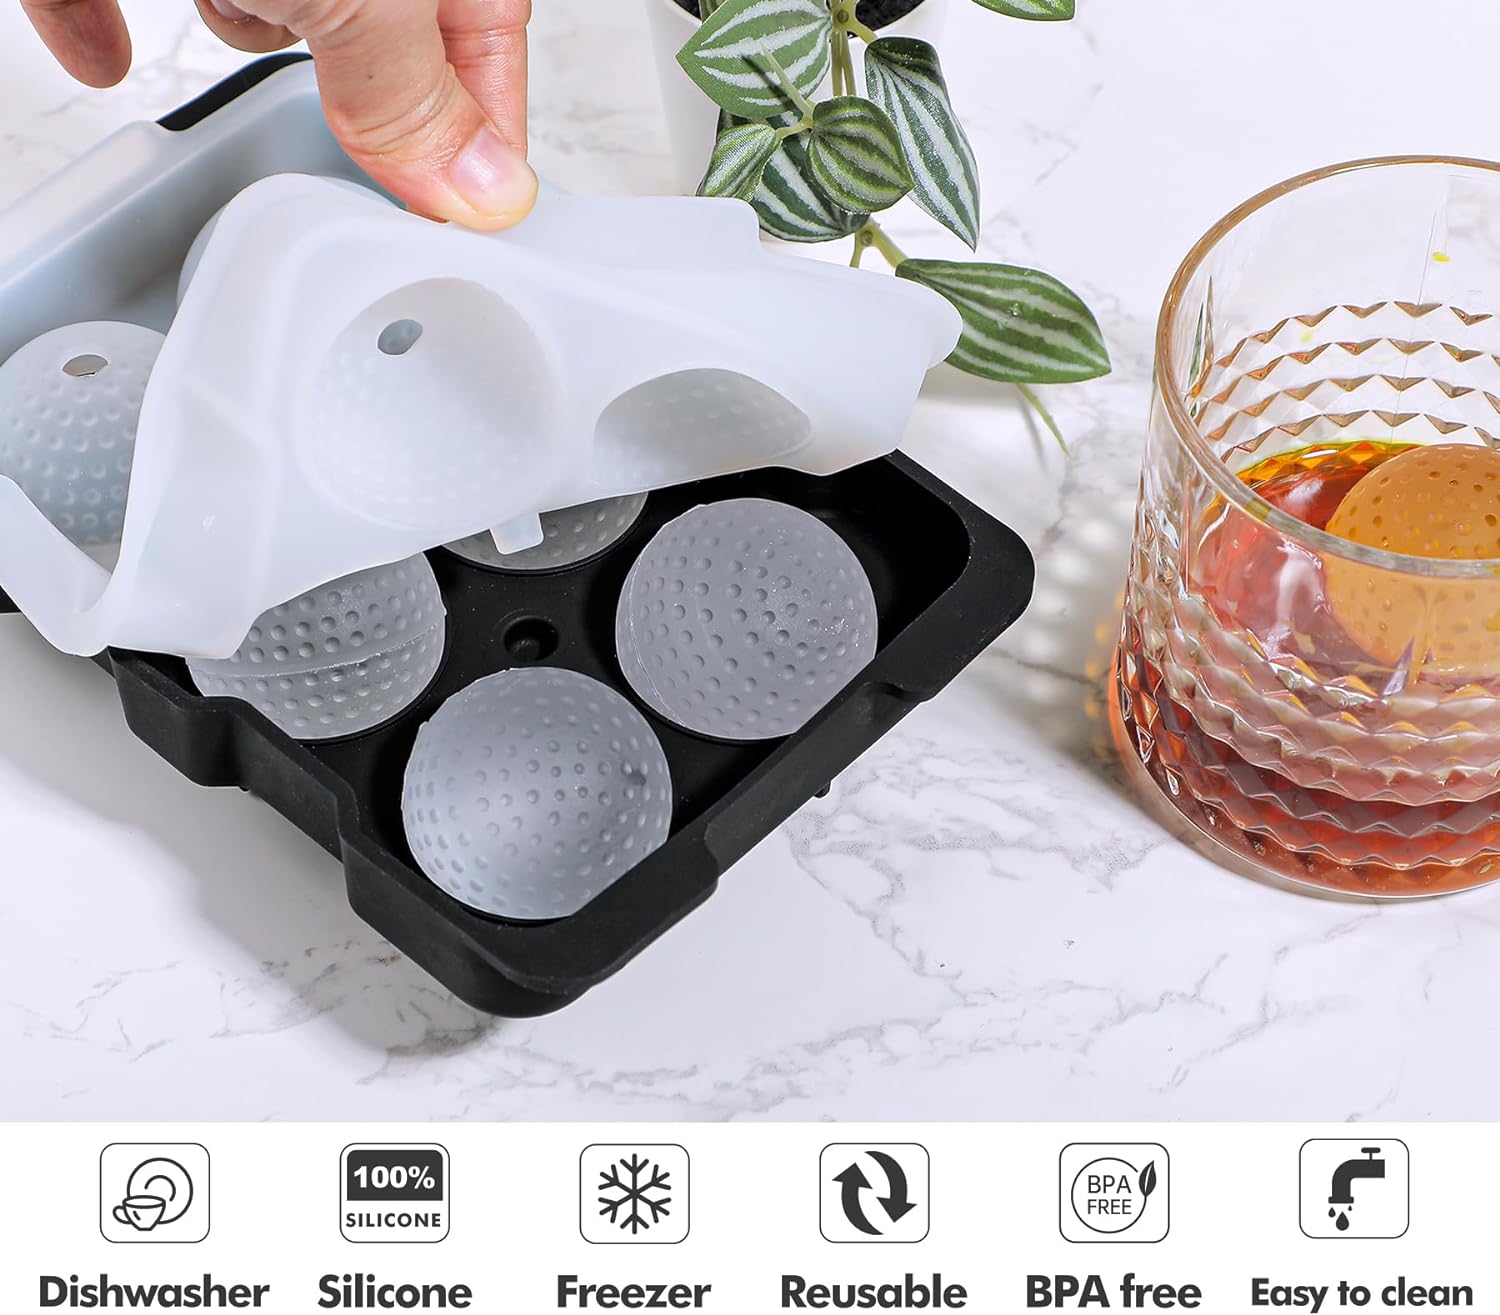 Webake Skull Ice Cube Mold, 10 Cavity Silicone Ice Mold with Lid for  Whiskey Skull Ice